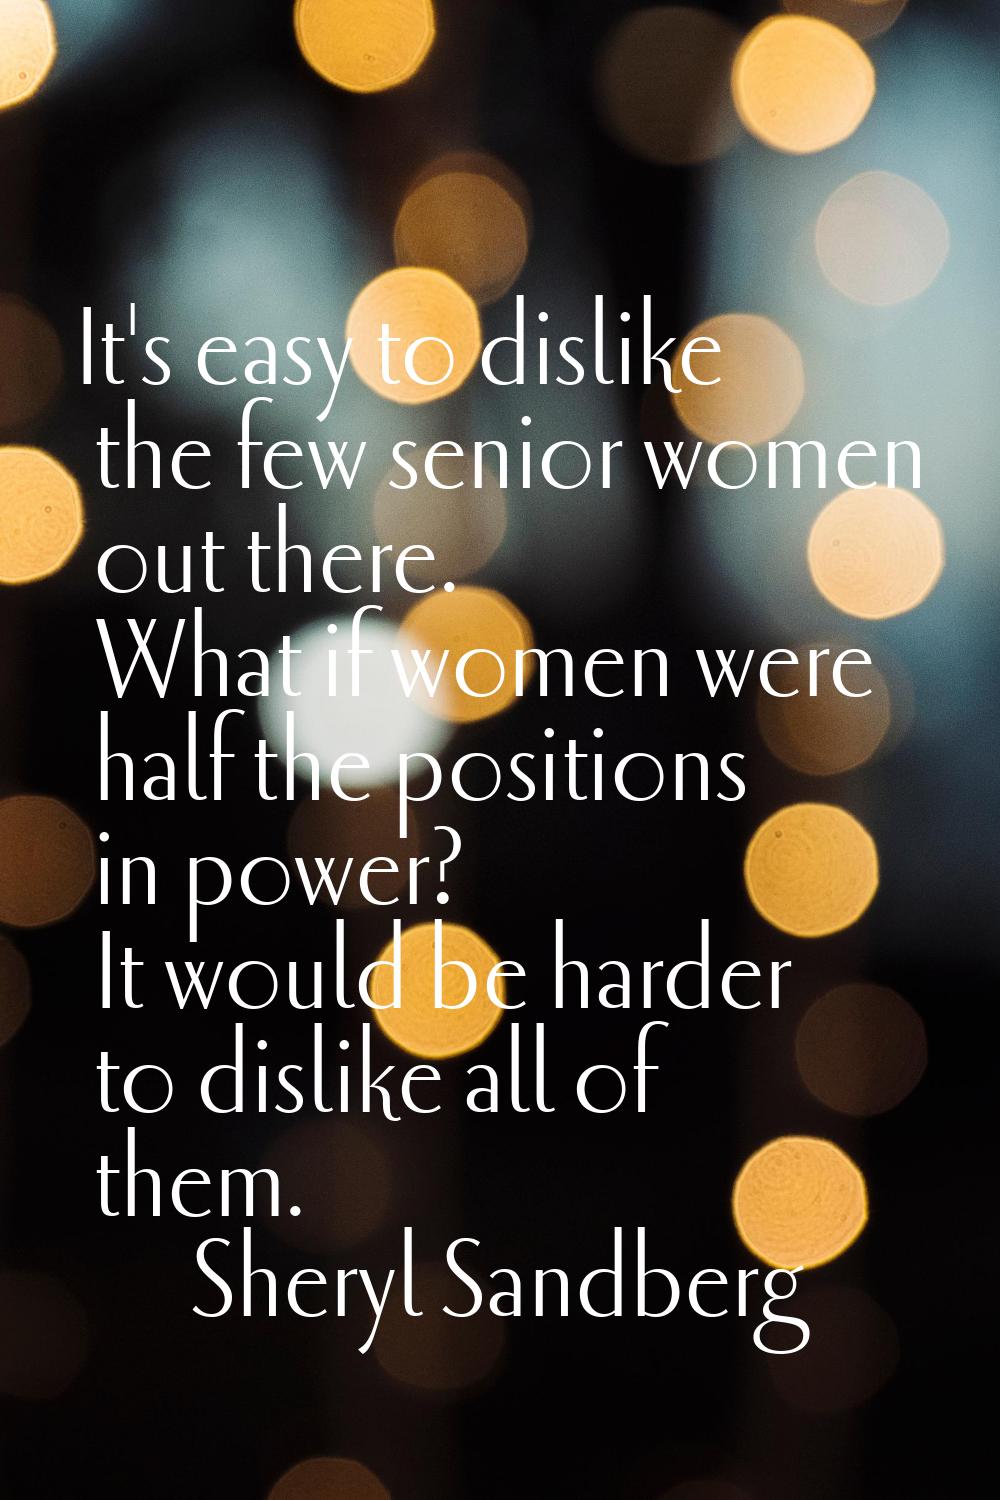 It's easy to dislike the few senior women out there. What if women were half the positions in power